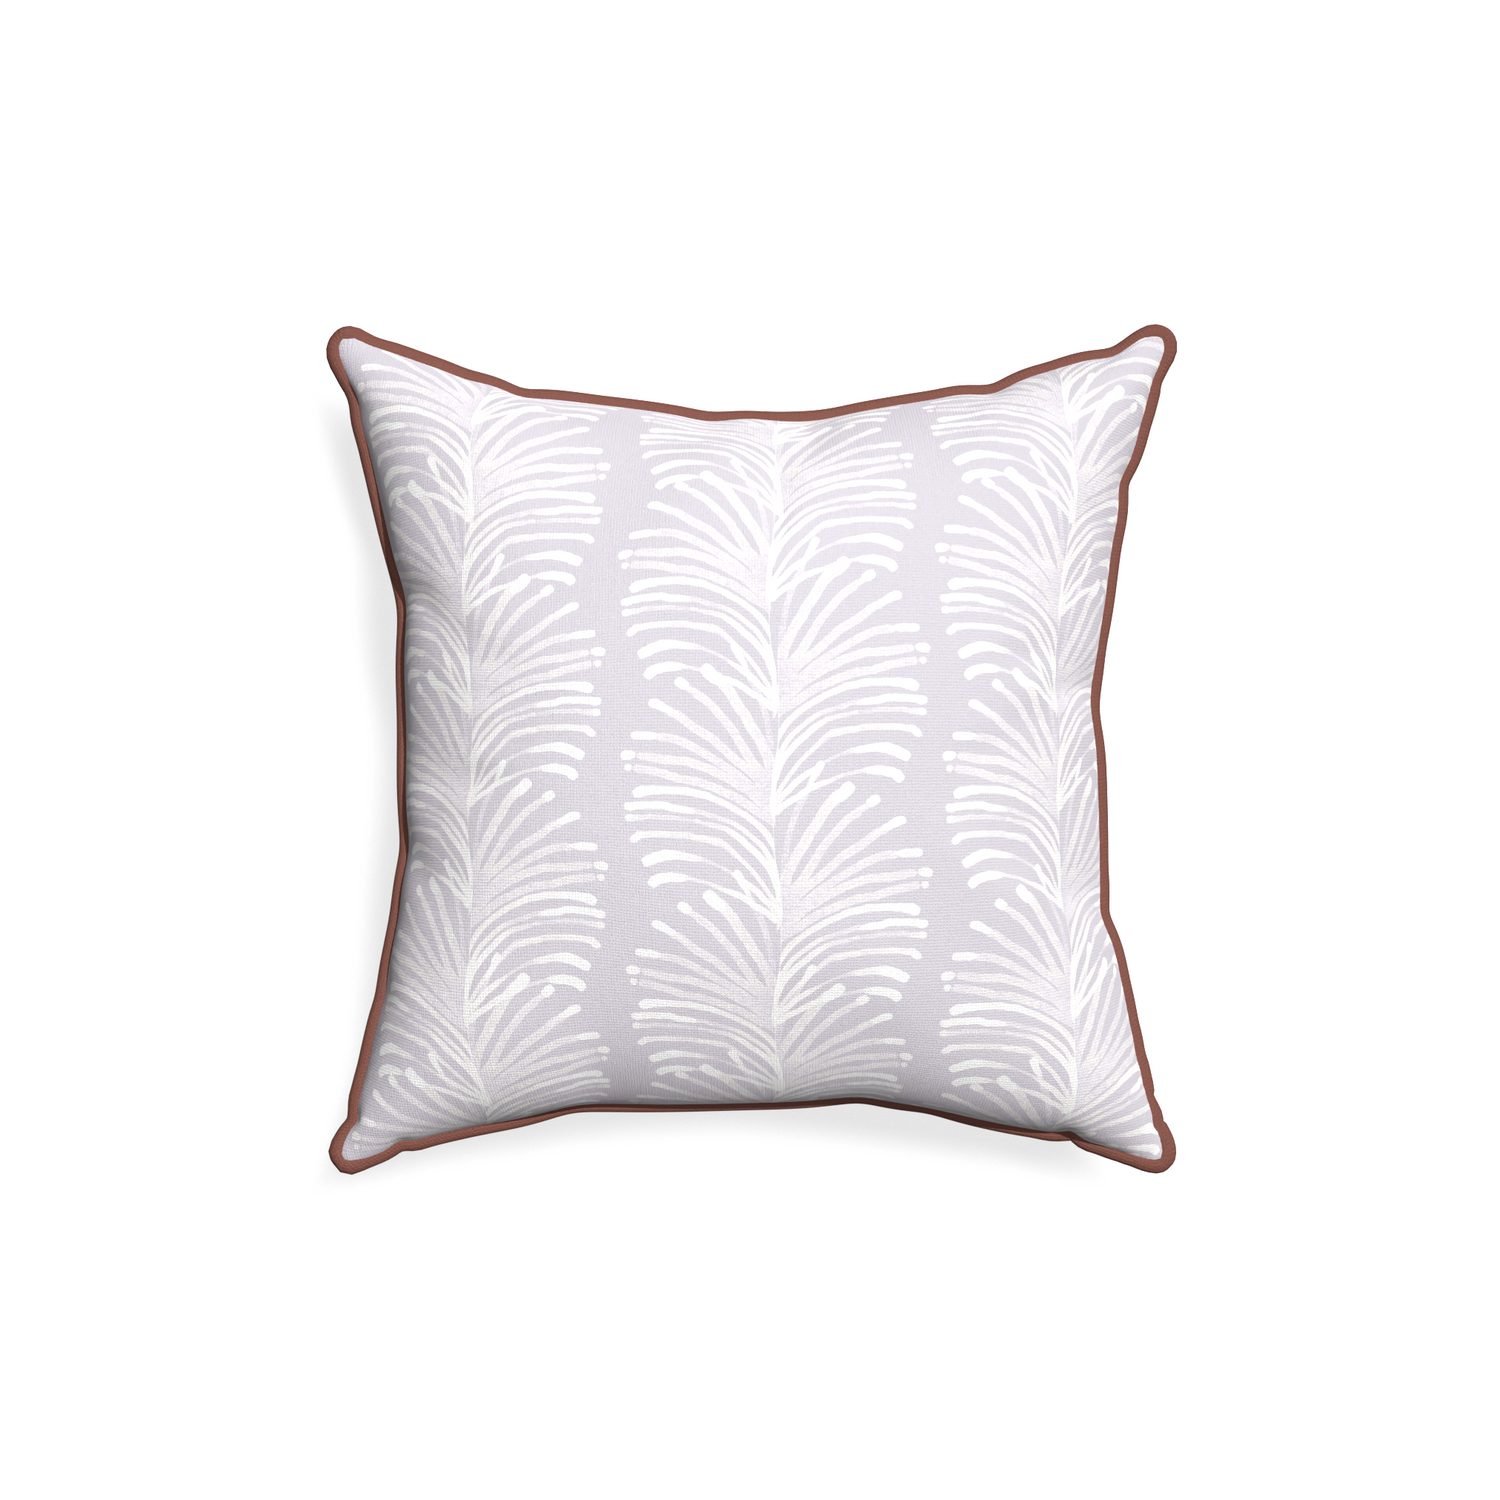 18-square emma lavender custom pillow with w piping on white background